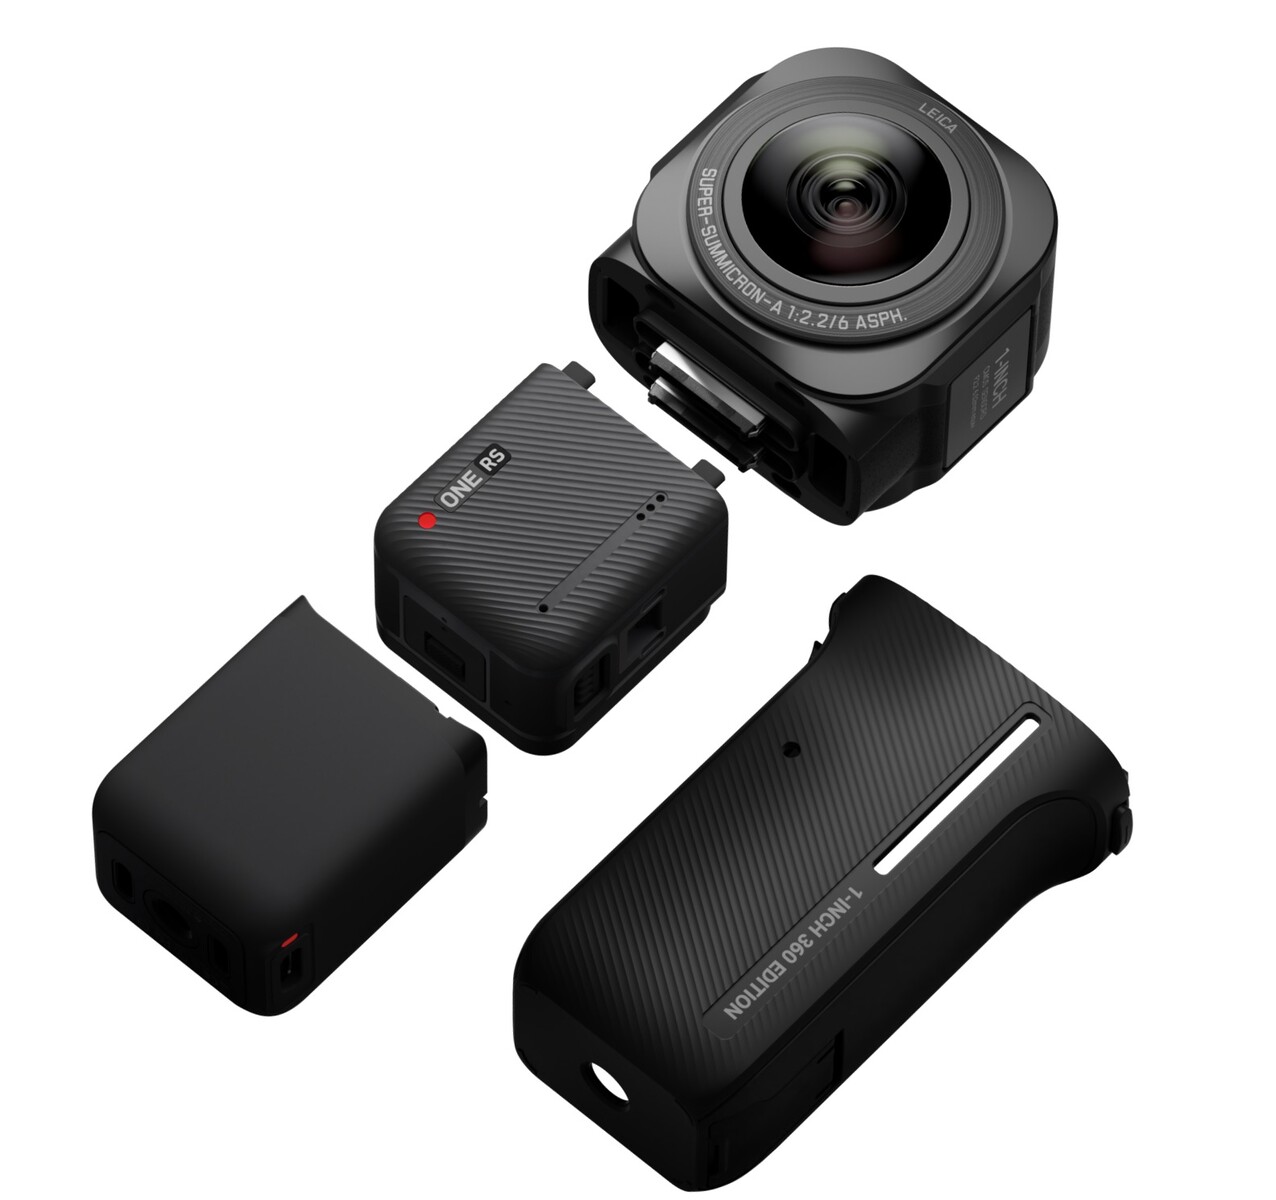 More leaked pictures of the upcoming Insta360 Ace Pro camera with Leica  lens - Photo Rumors